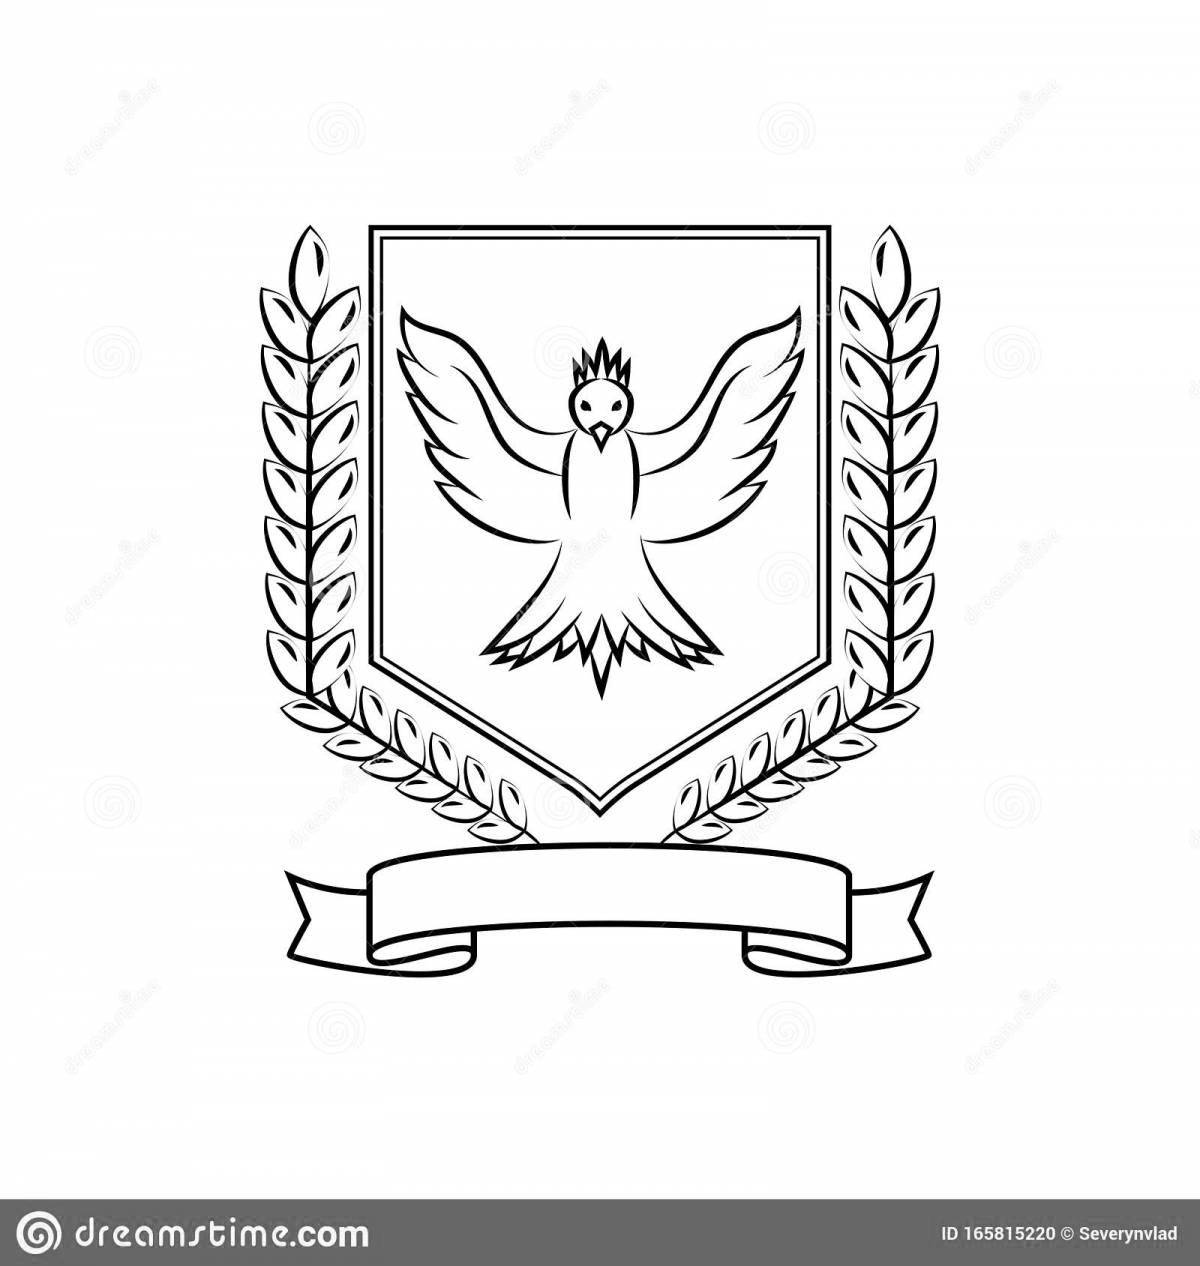 Majestic coat of arms of the city of eagle